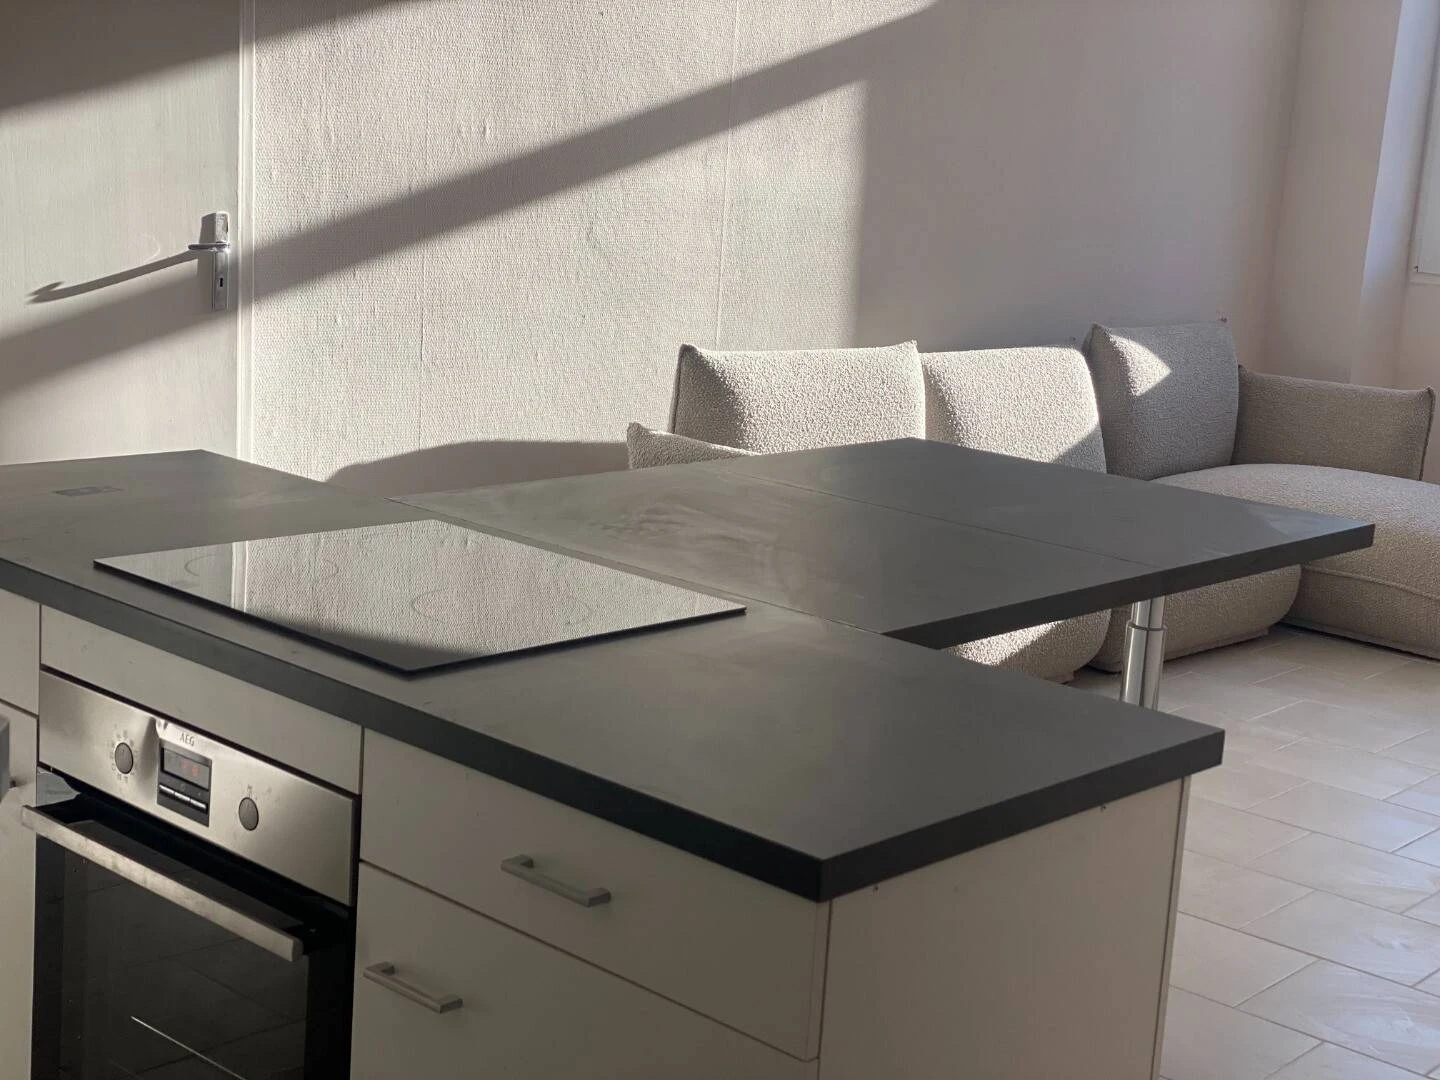 Room for rent in a shared flat in Nîmes